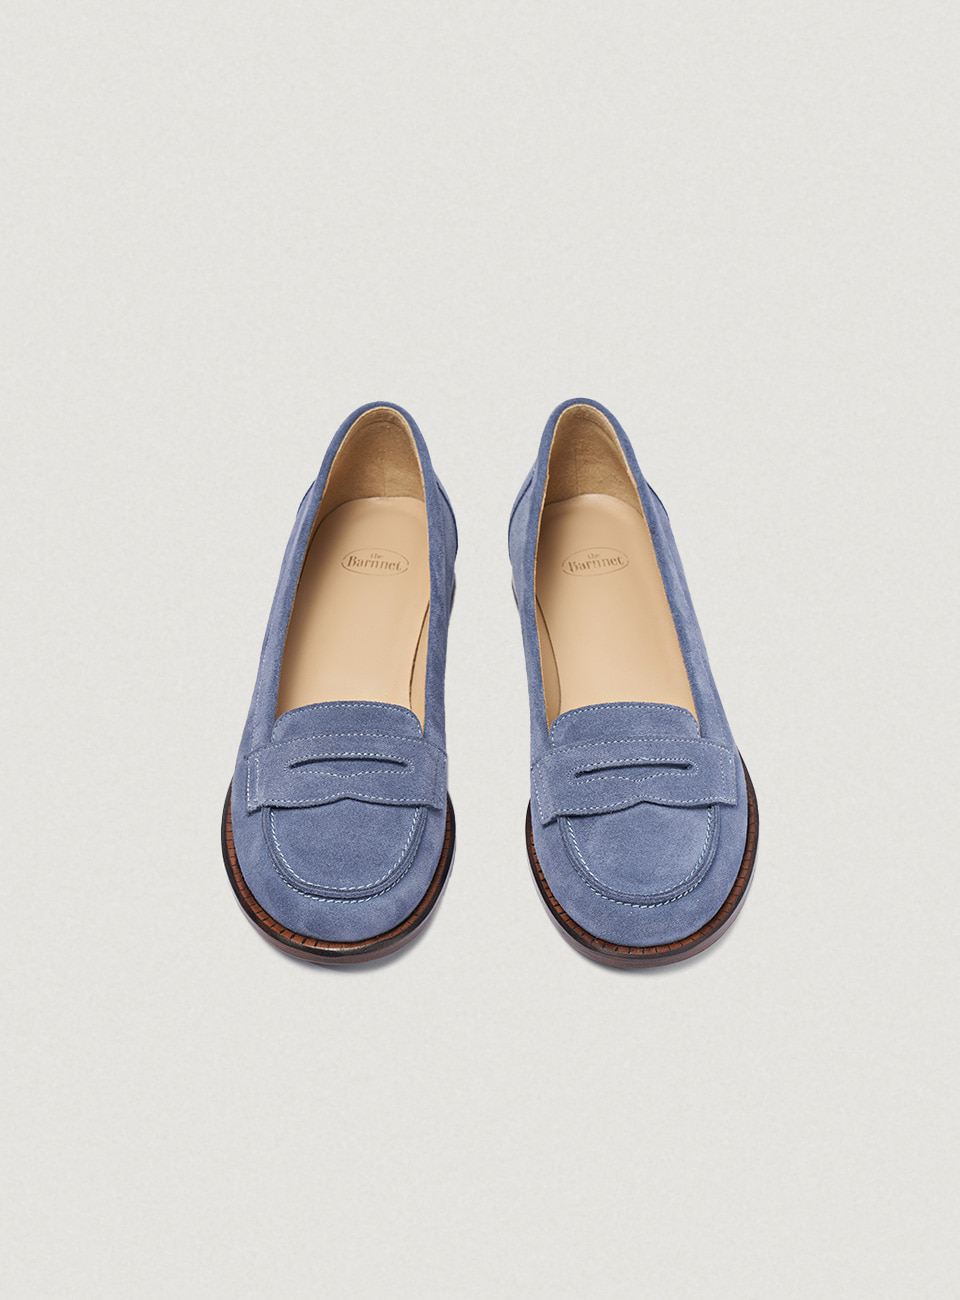 Blue Suede Pump Penny Loafers